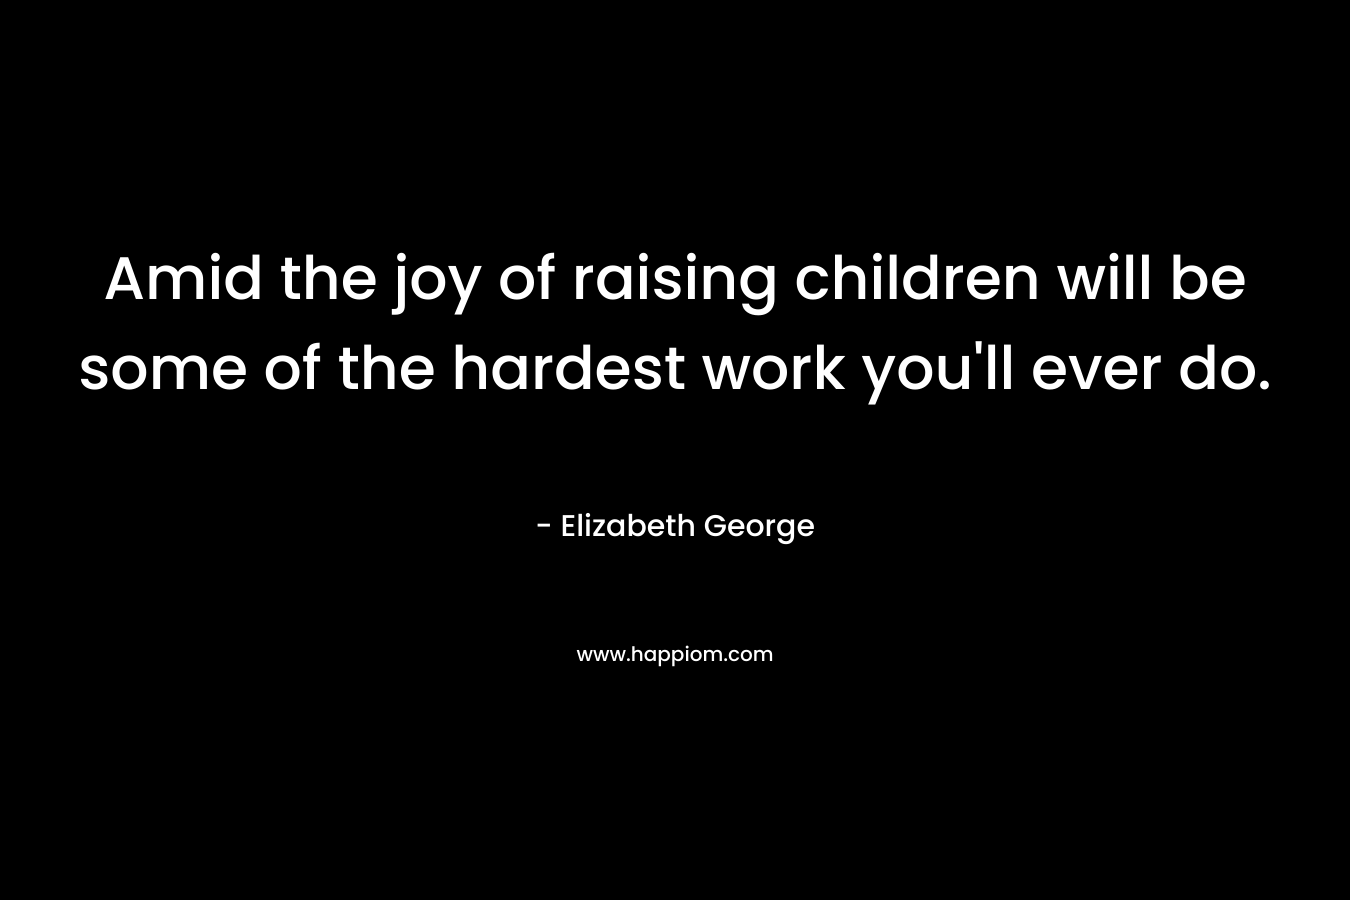 Amid the joy of raising children will be some of the hardest work you'll ever do.